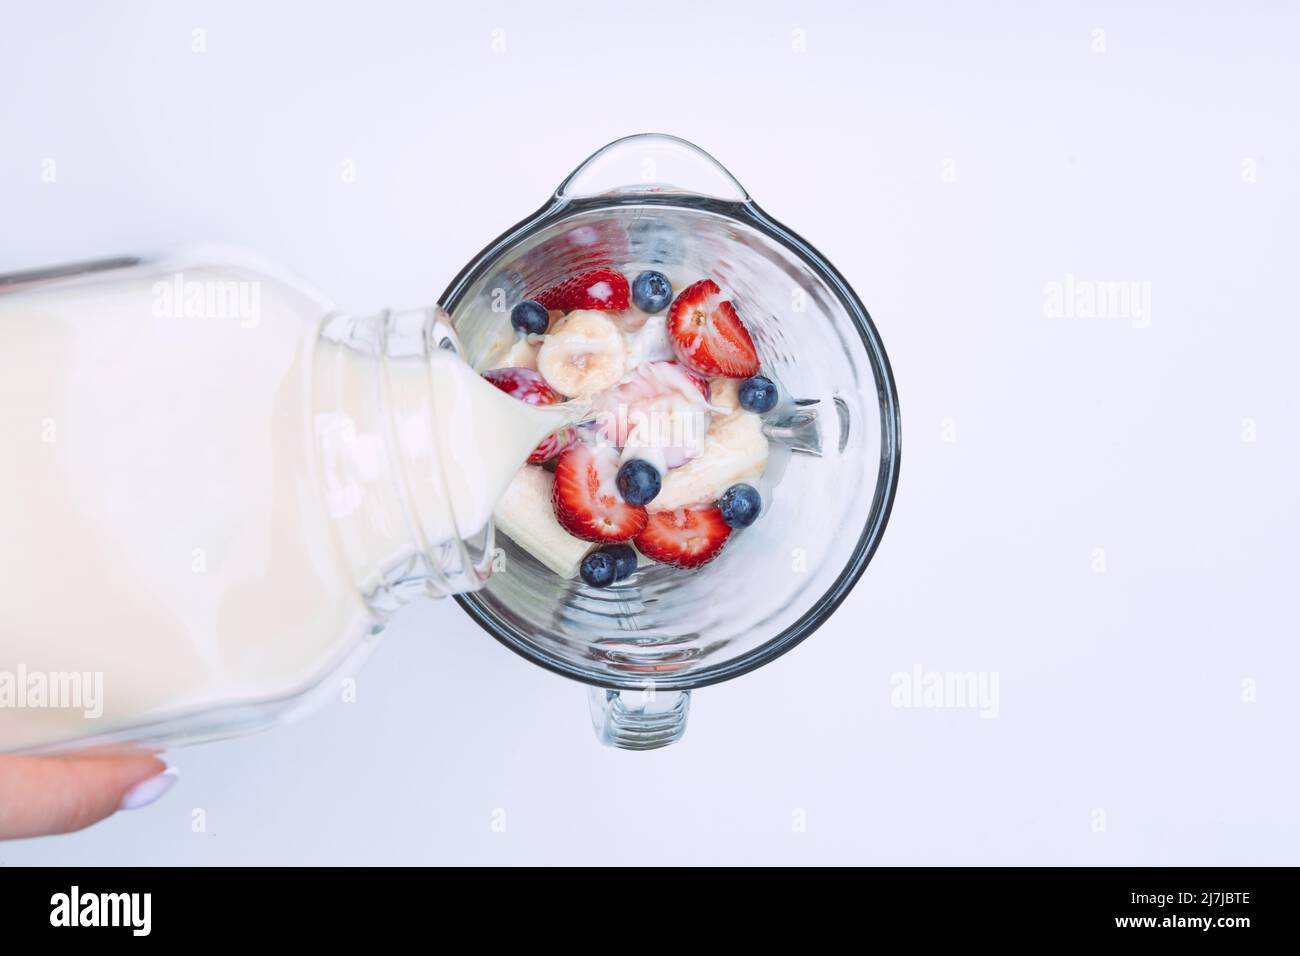 Making smoothie or milkshake in blender. Pouring milk in a blender with fruits. Vegan smoothie with plant based milk Stock Photo